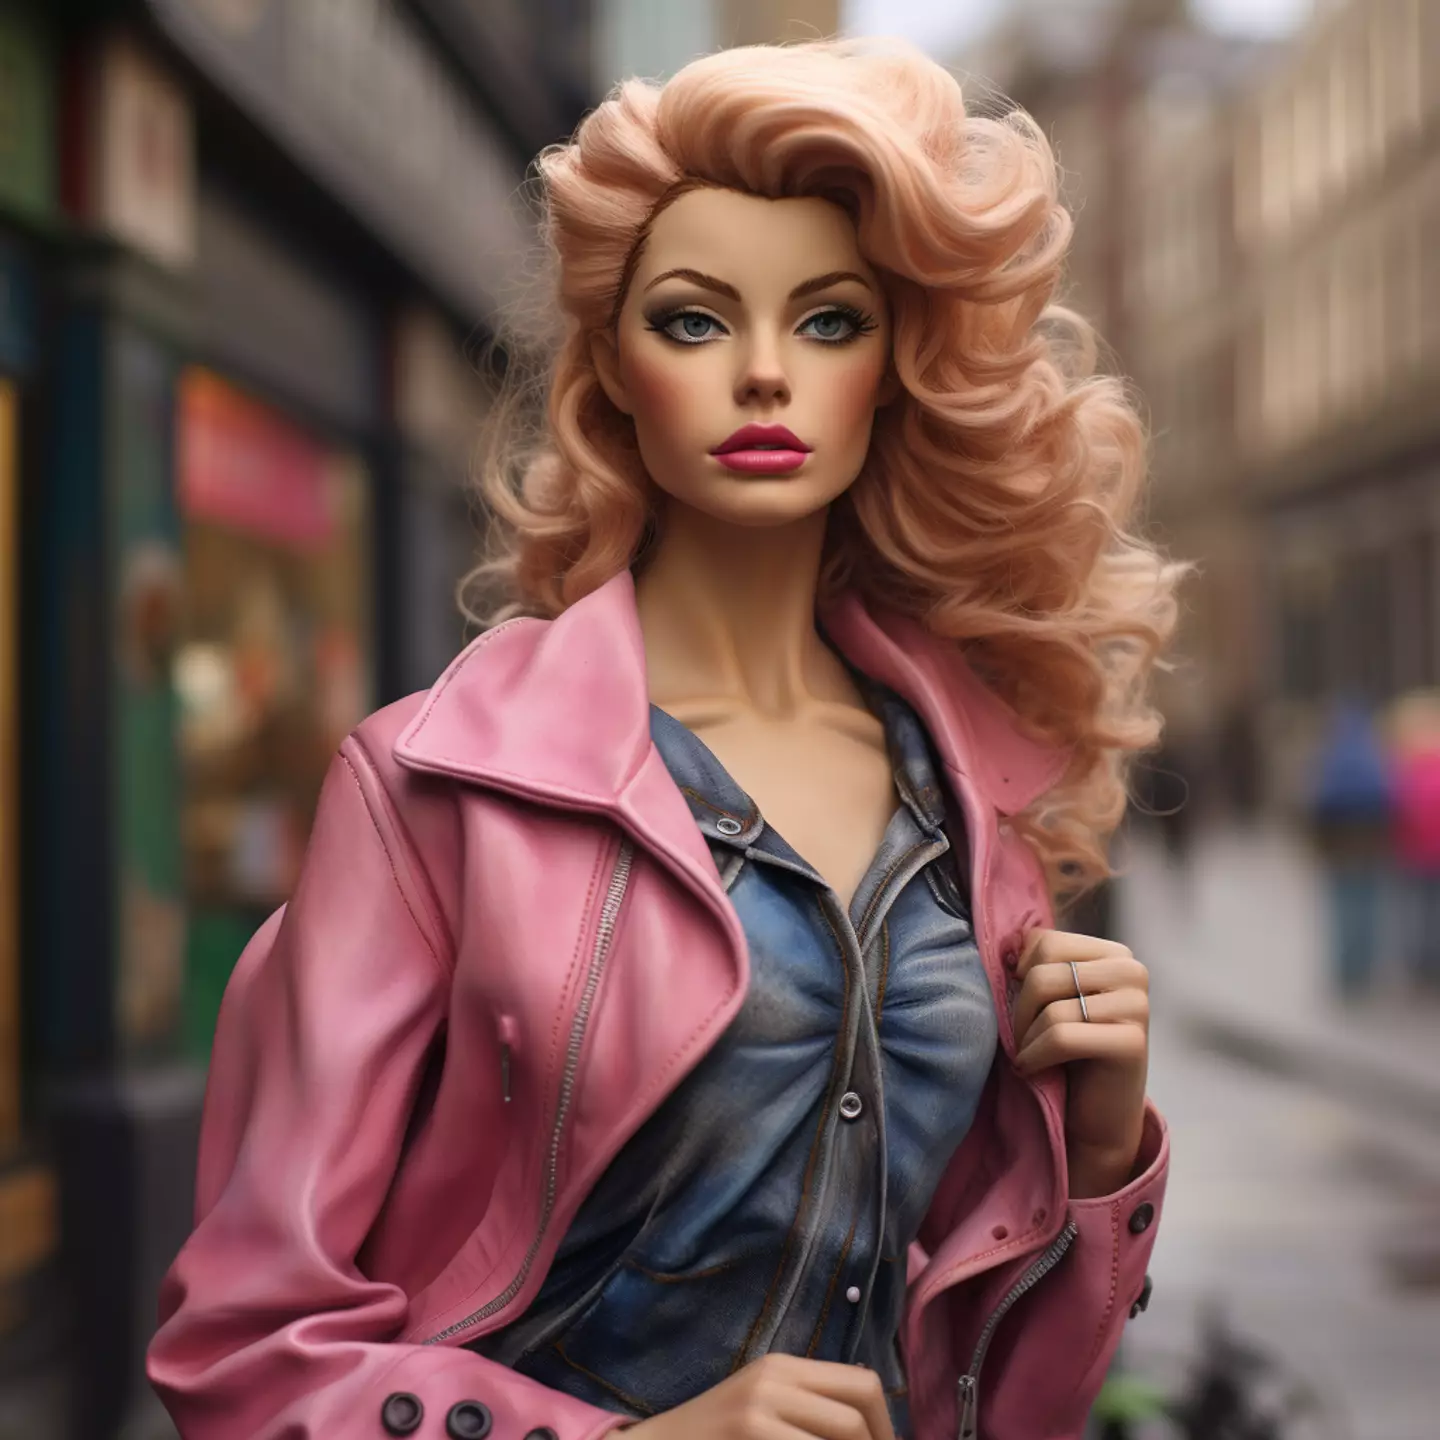 This Barbie is from Belfast.